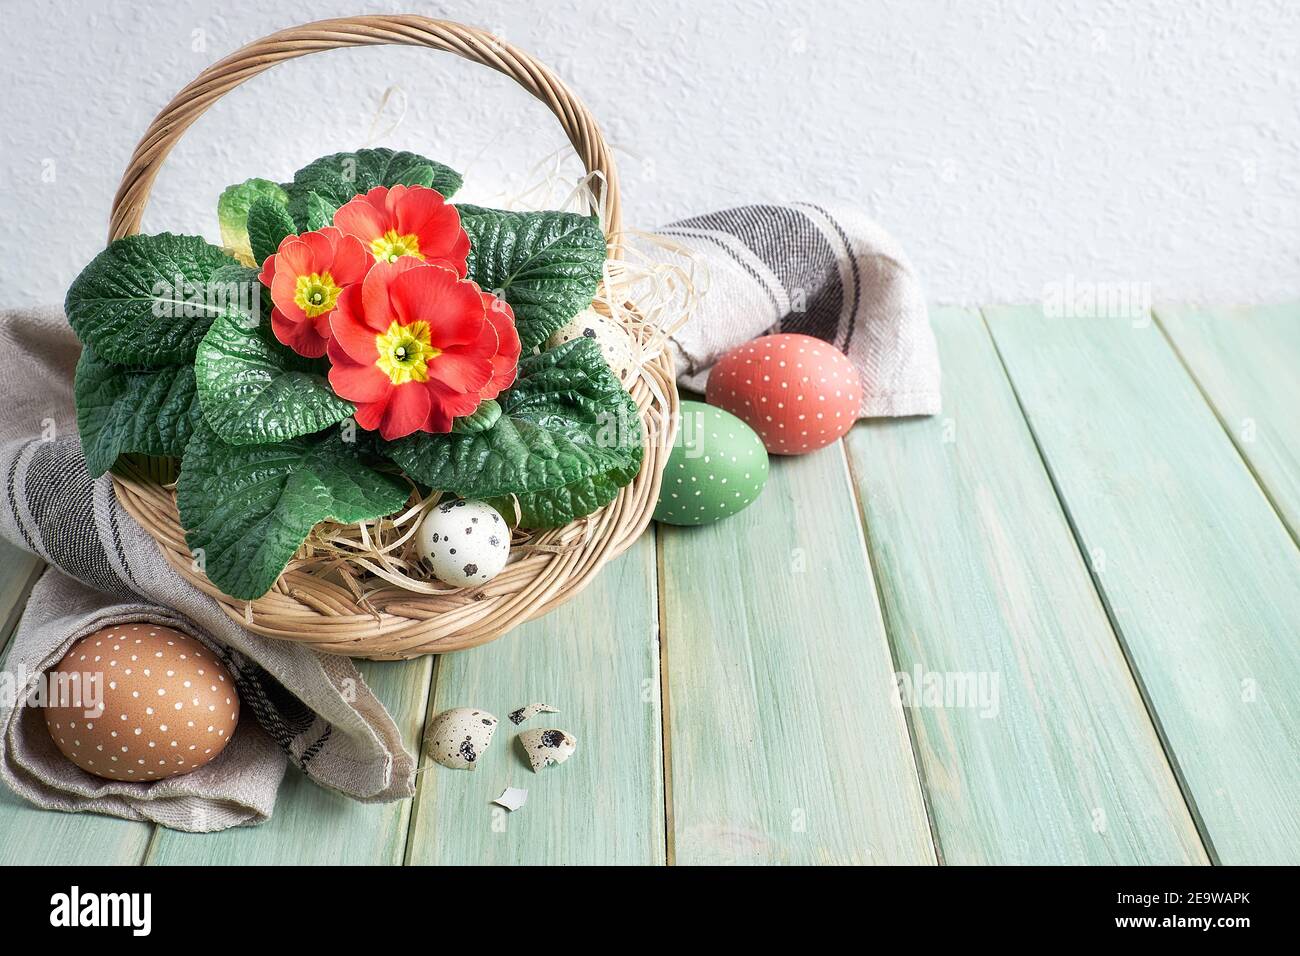 Easter Basket With Quail Egg And Red Primrose Pot Flowers Painted Easter Eggs In Linen Tower On Light Mint Green Rustic Wooden Table Springtime East Stock Photo Alamy